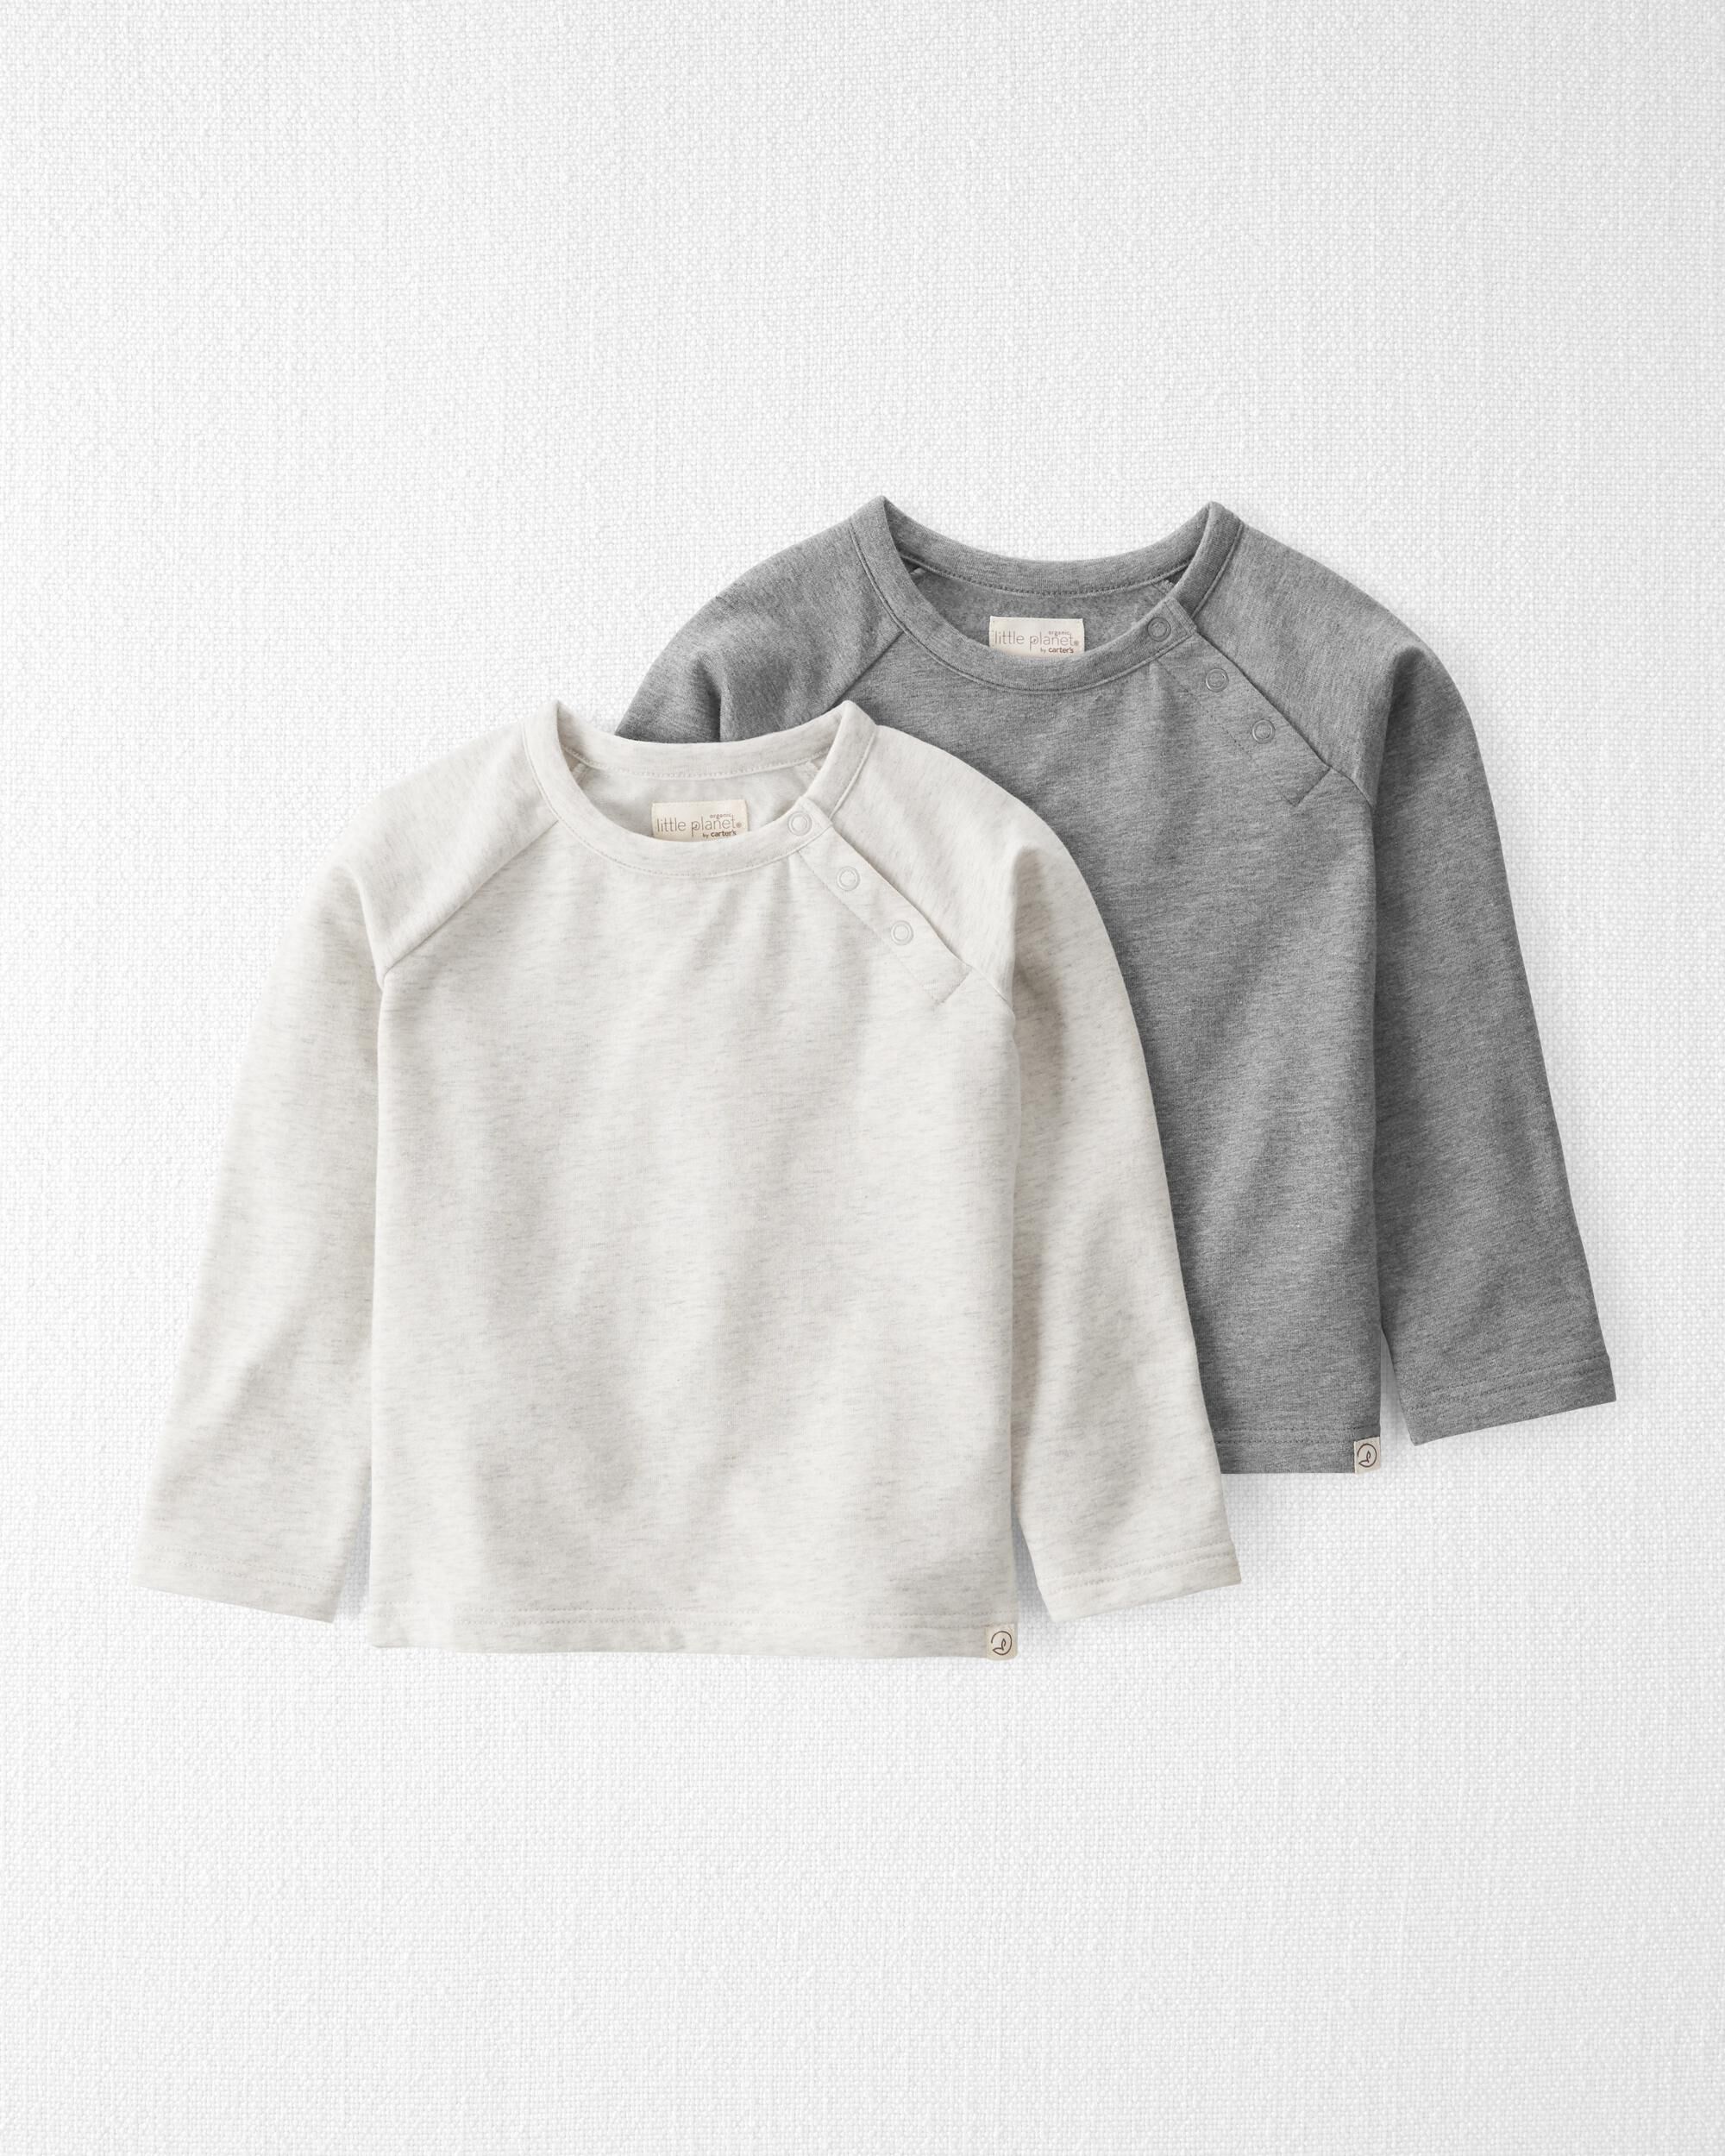 Heather Grey Toddler 2-Pack Fleece Tops Made with Organic Cotton